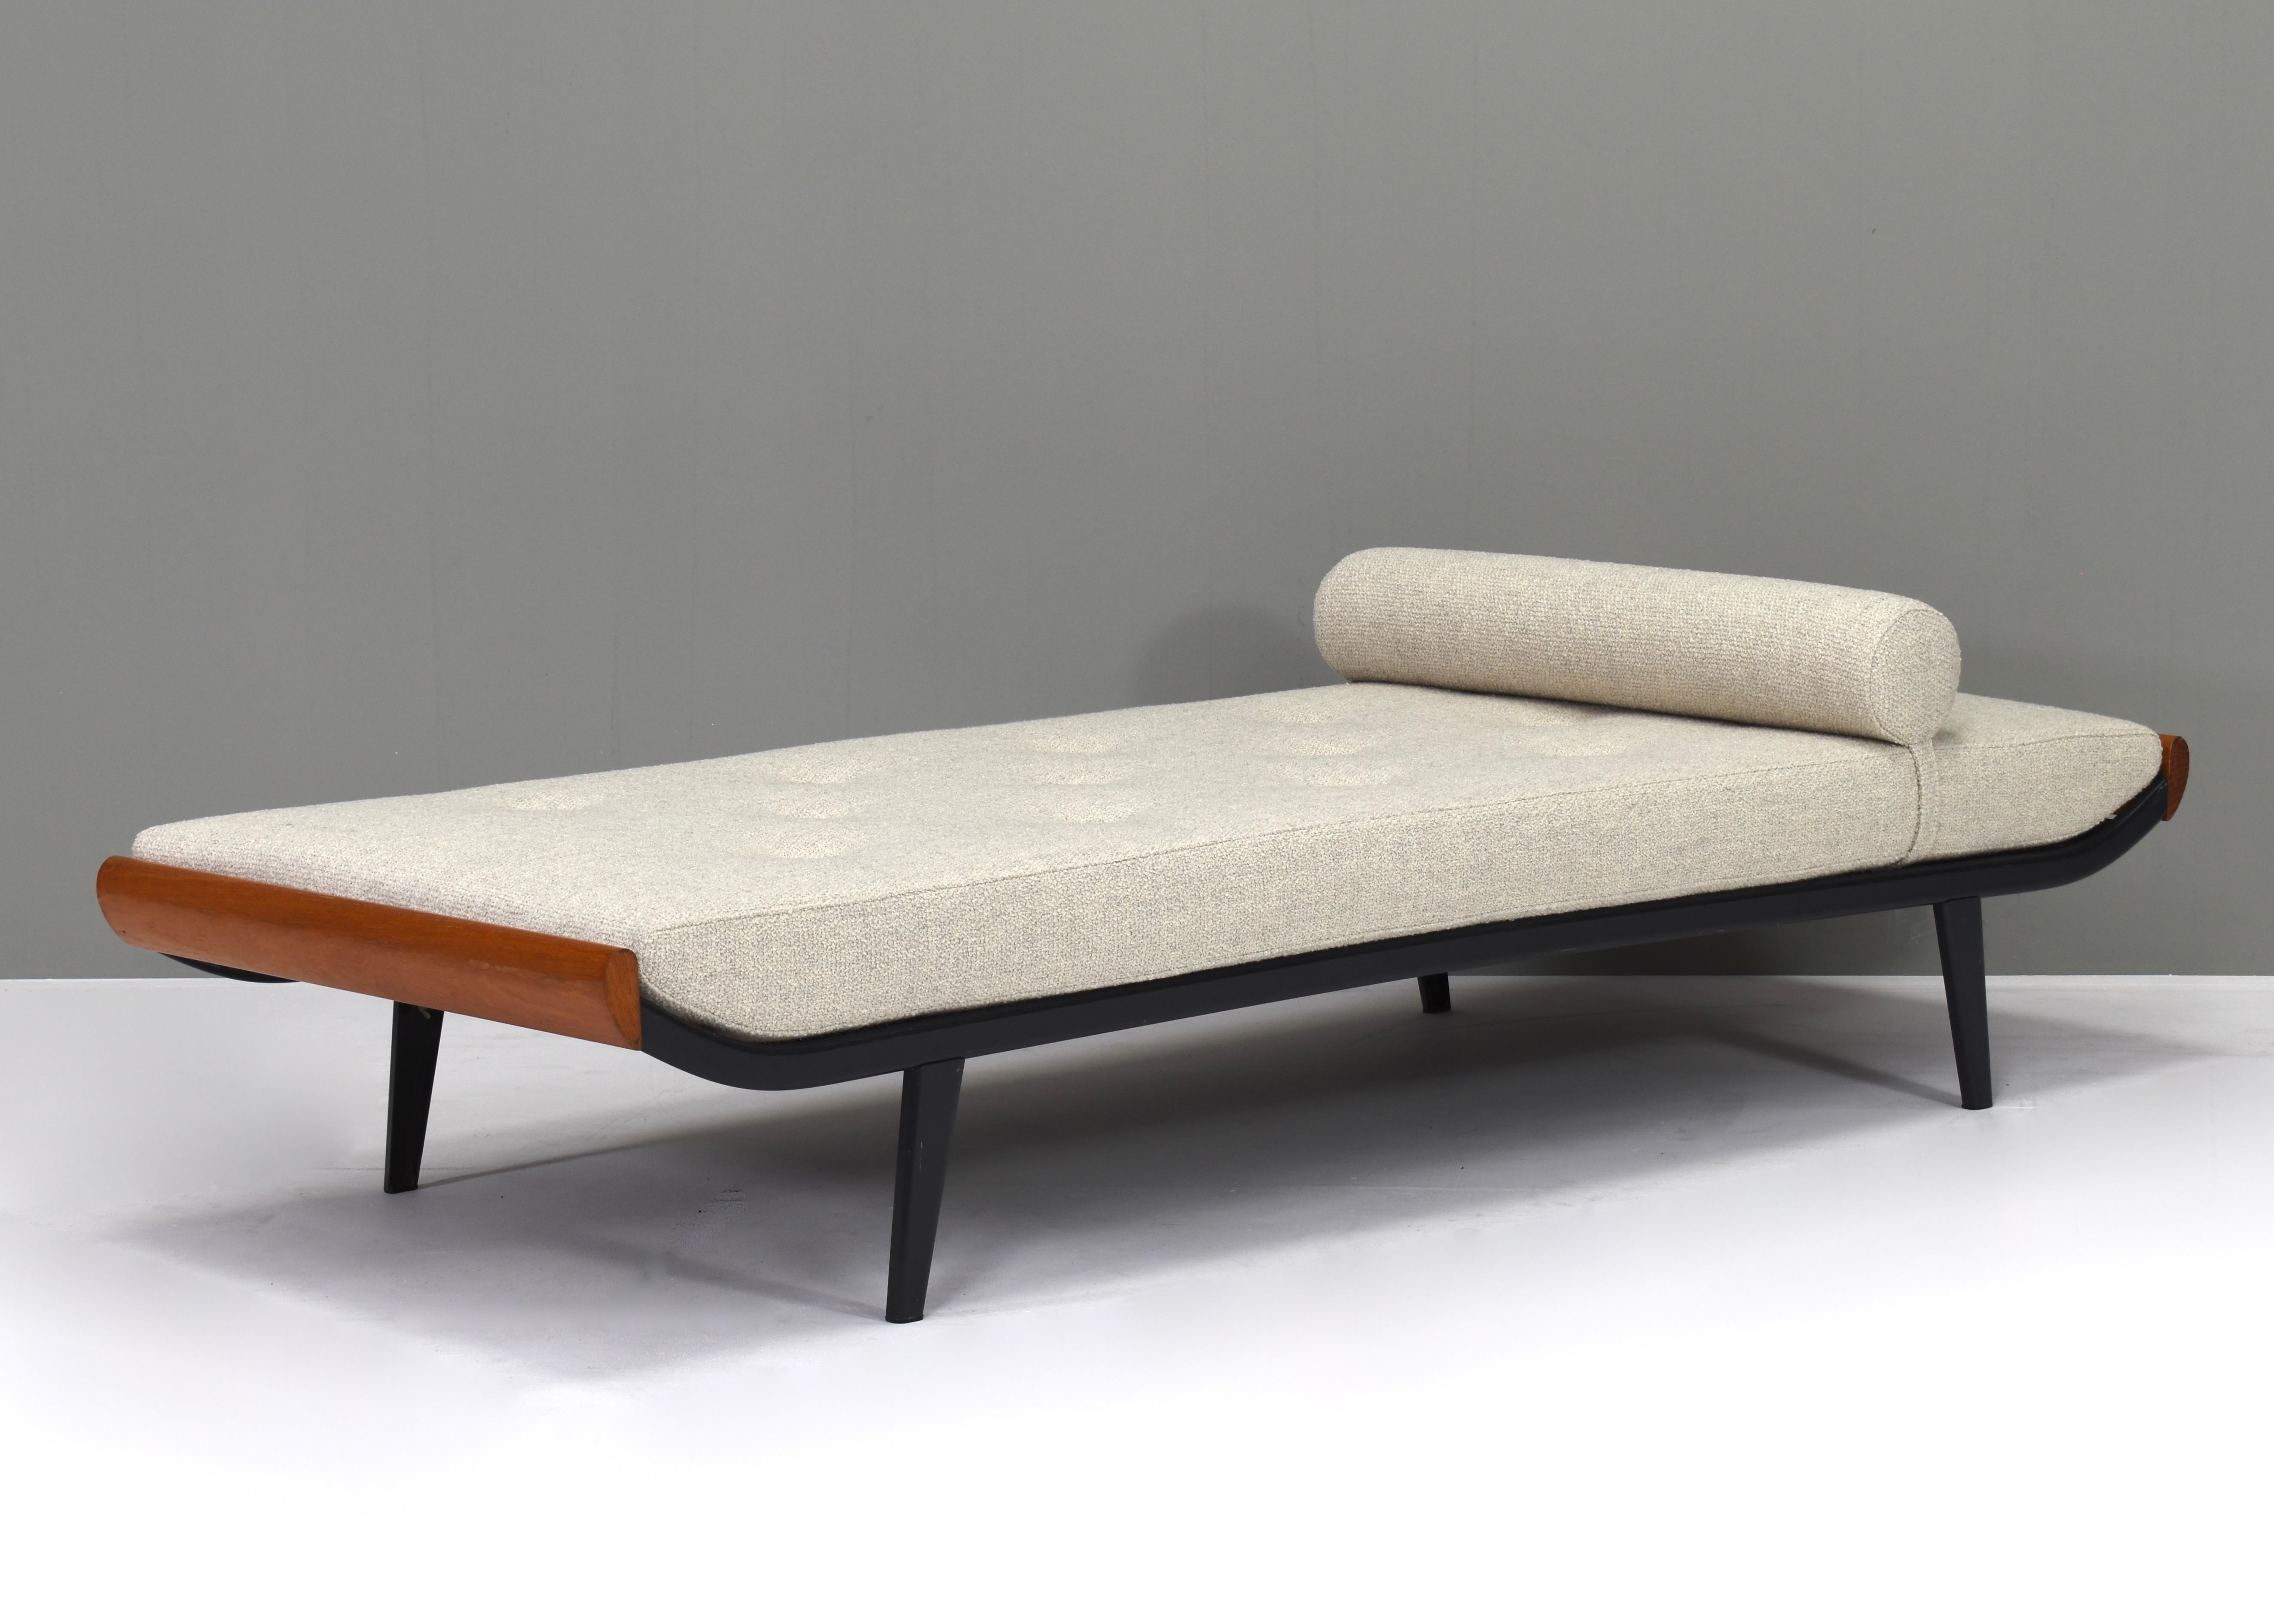 Dutch Cleopatra Daybed by Cordemeijer for Auping, Netherlands, 1954